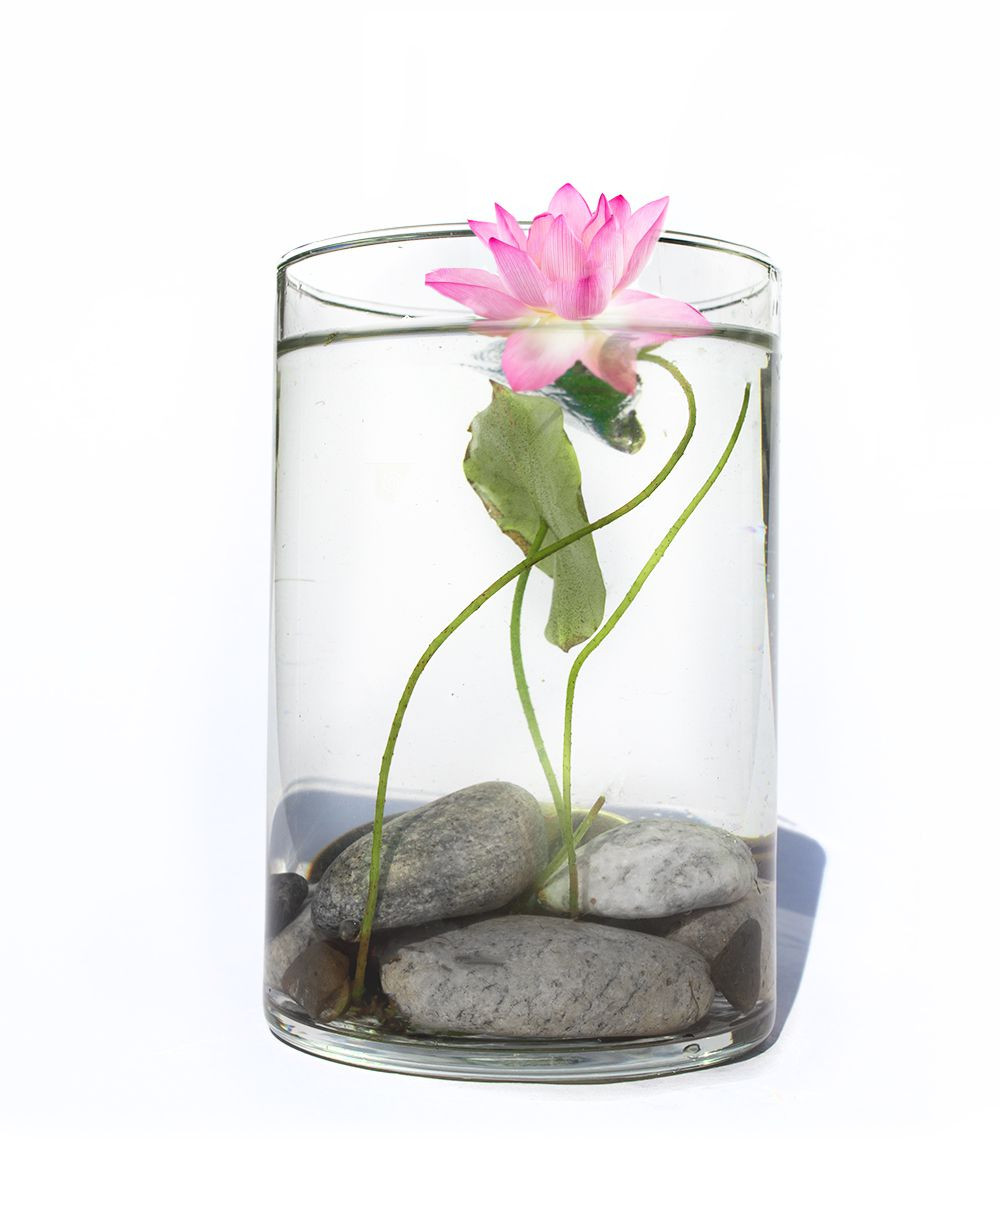 28 Wonderful Floral Arrangement In Glass Vase 2024 free download floral arrangement in glass vase of make a stunning water lily floral arrangement throughout water lily diy 56a262d53df78cf77274f452